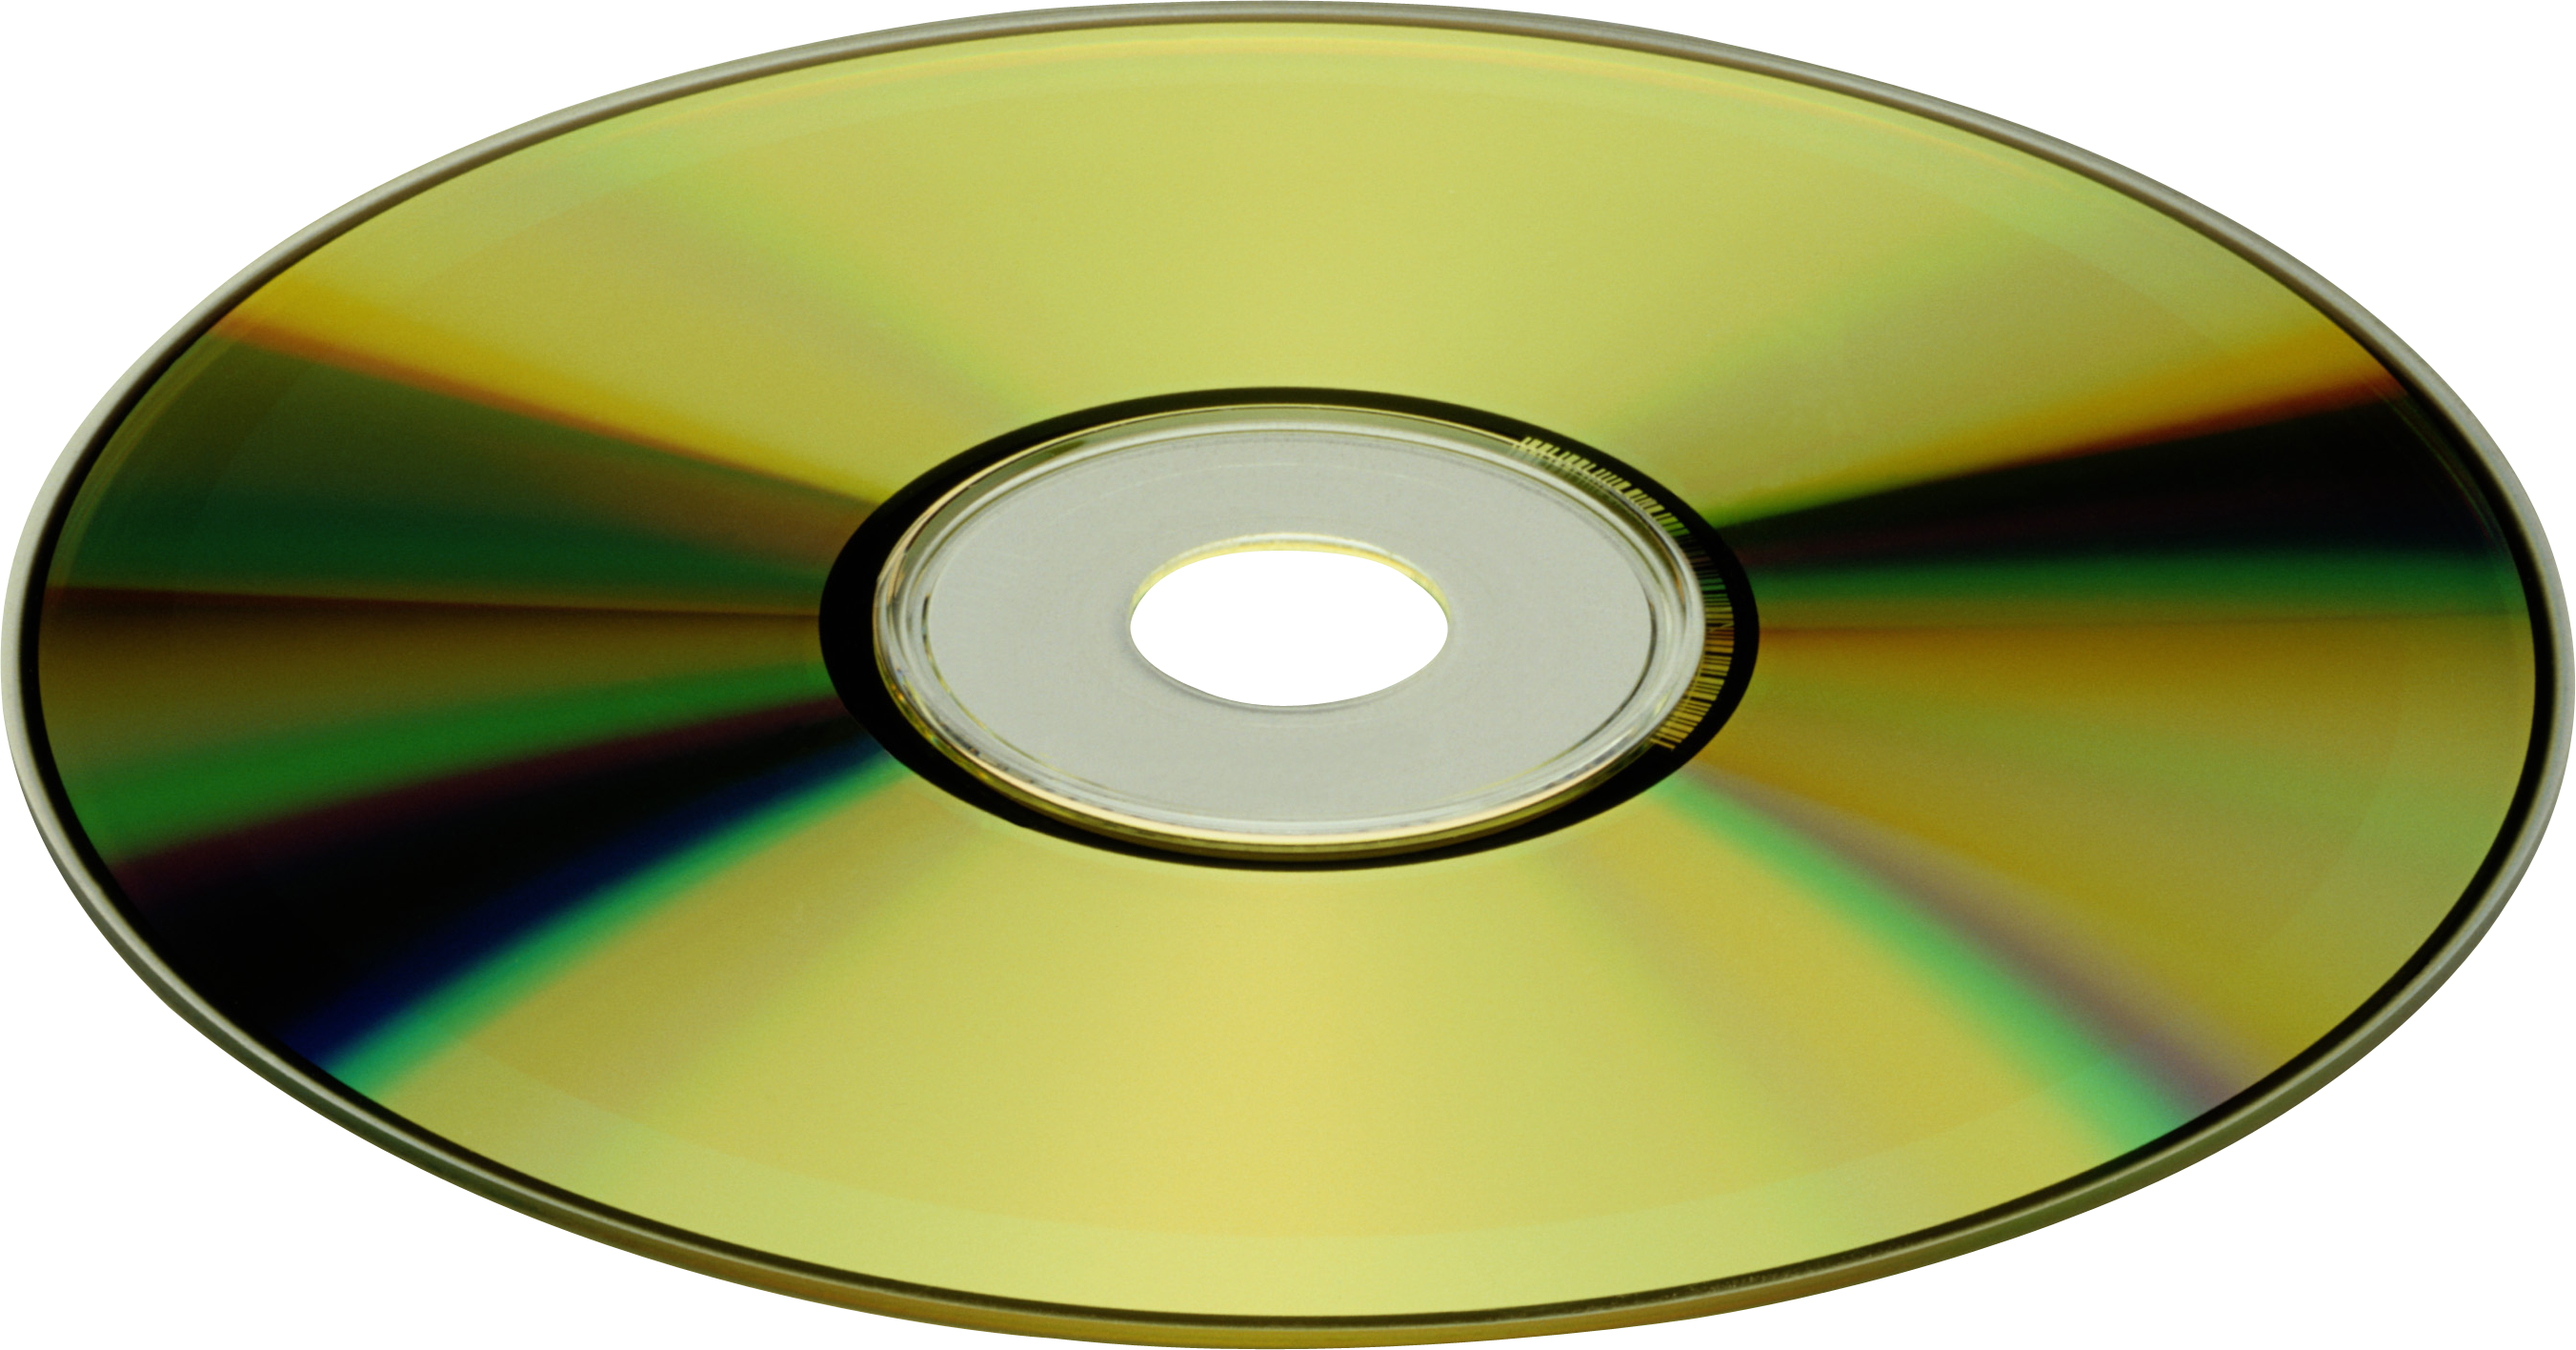 Old Compact Disk PNG Clipart Background